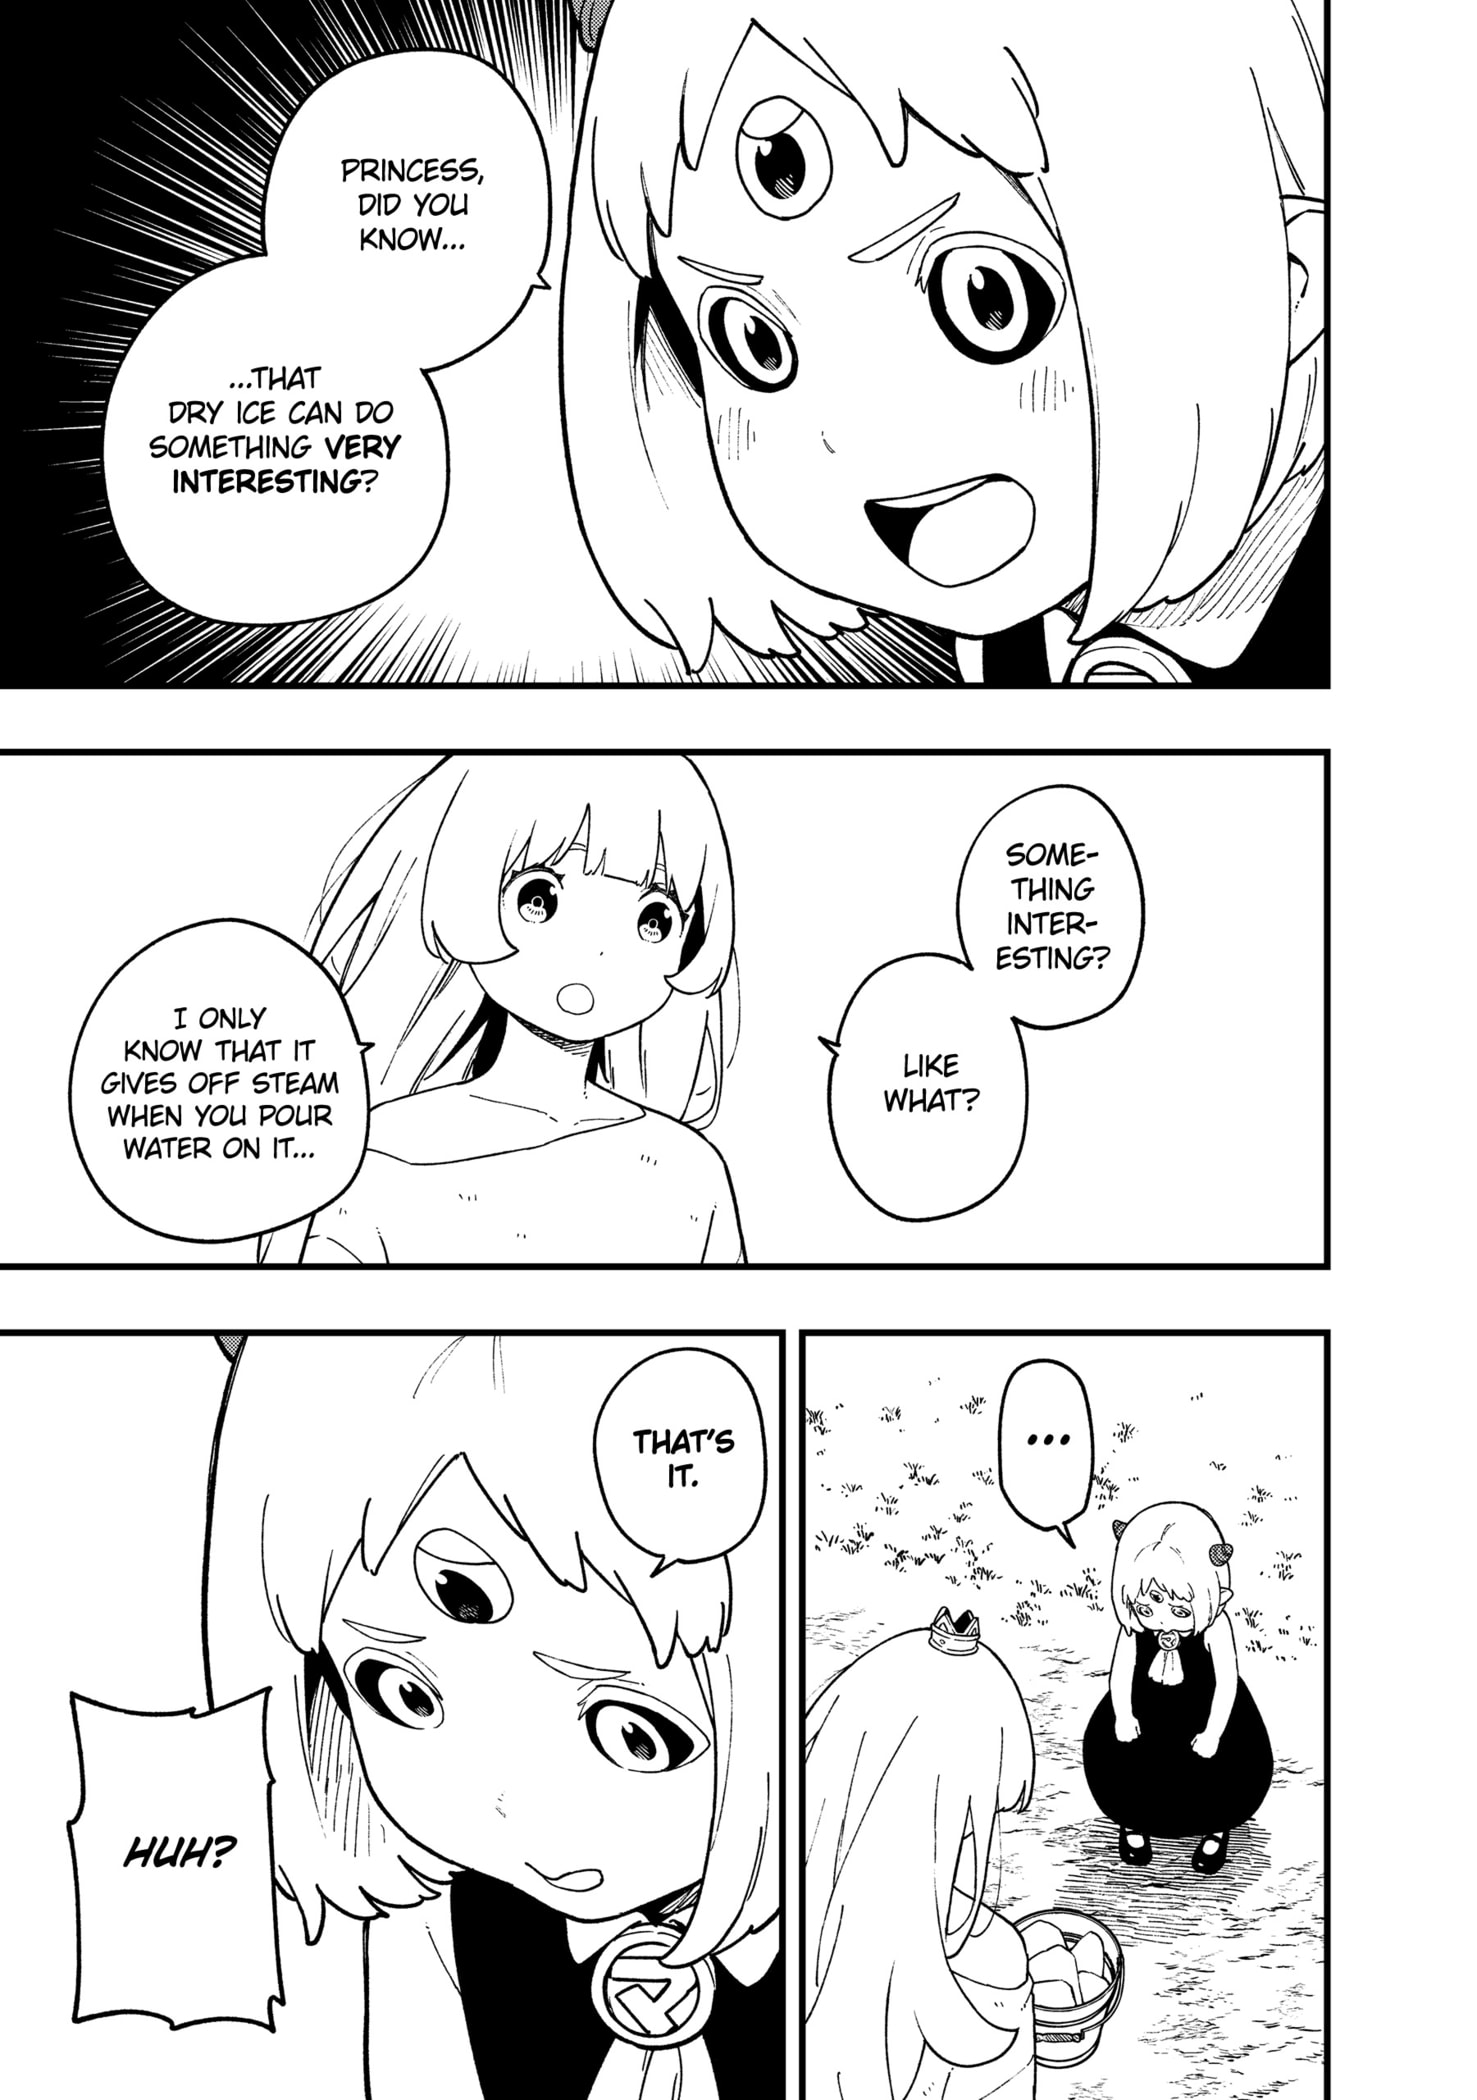 It's Time for "Interrogation", Princess! - chapter 233 - #3